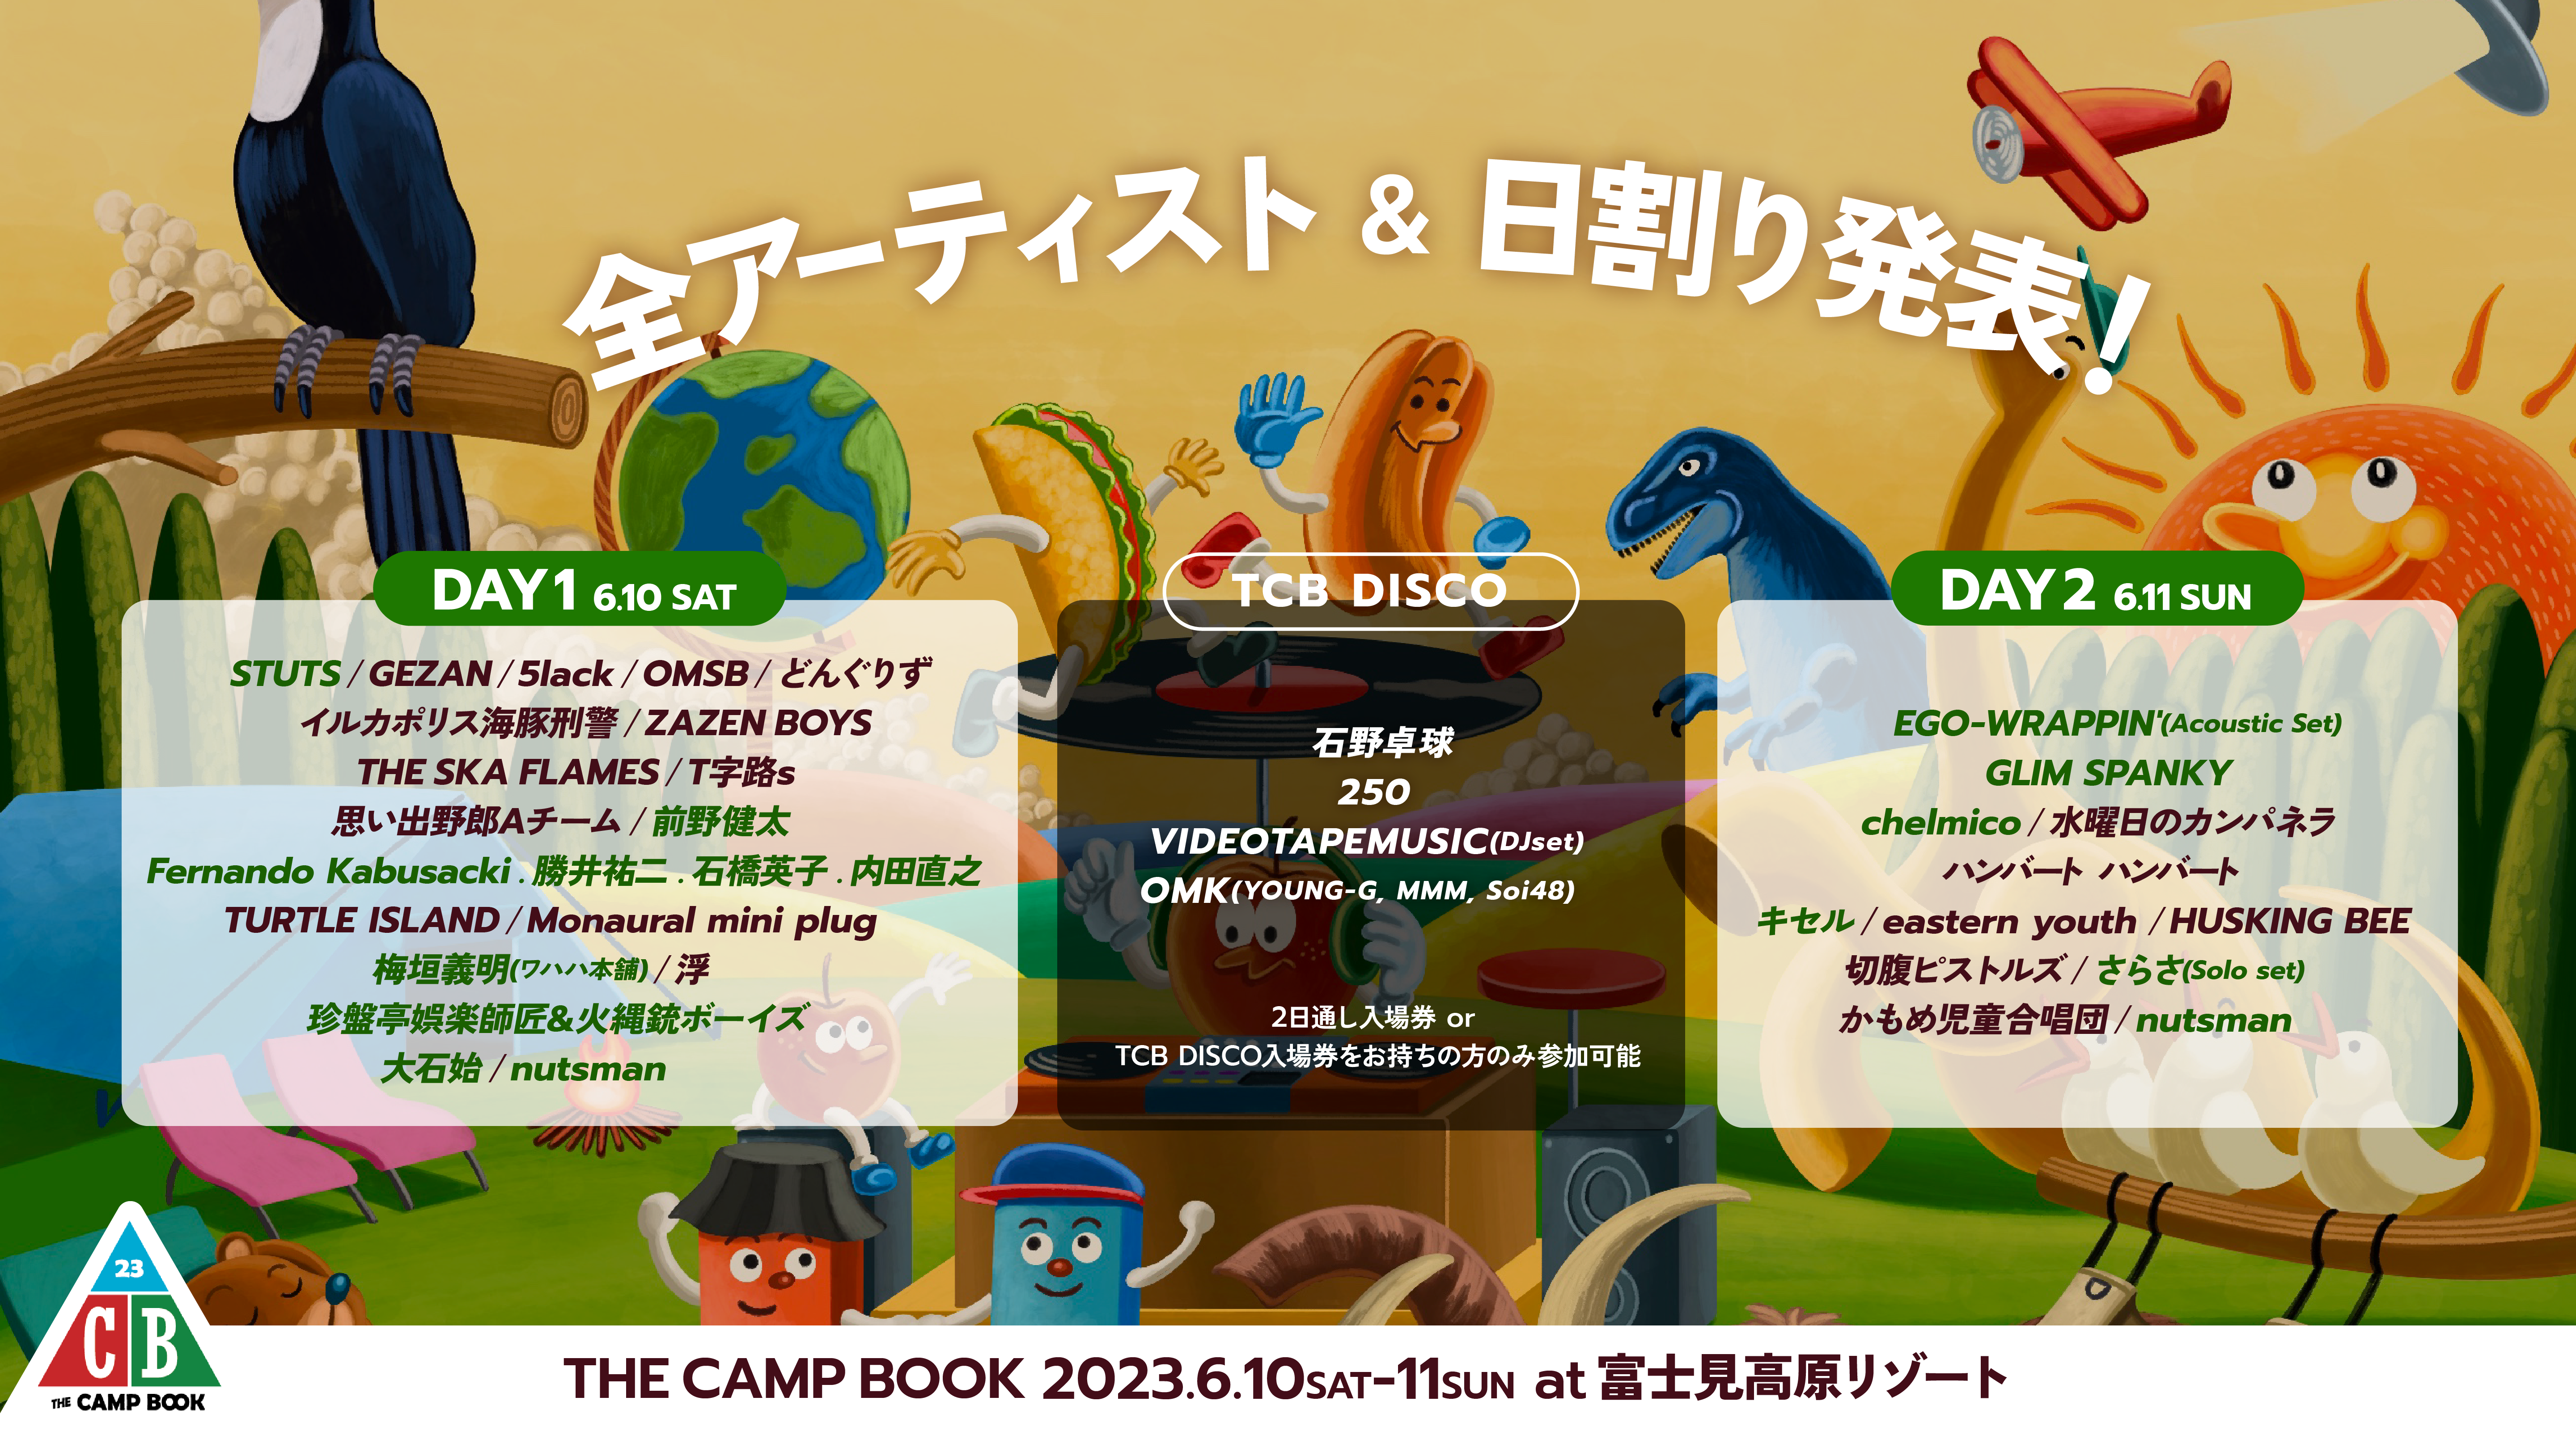 6/11「THE CAMP BOOK 2023」に出演決定！